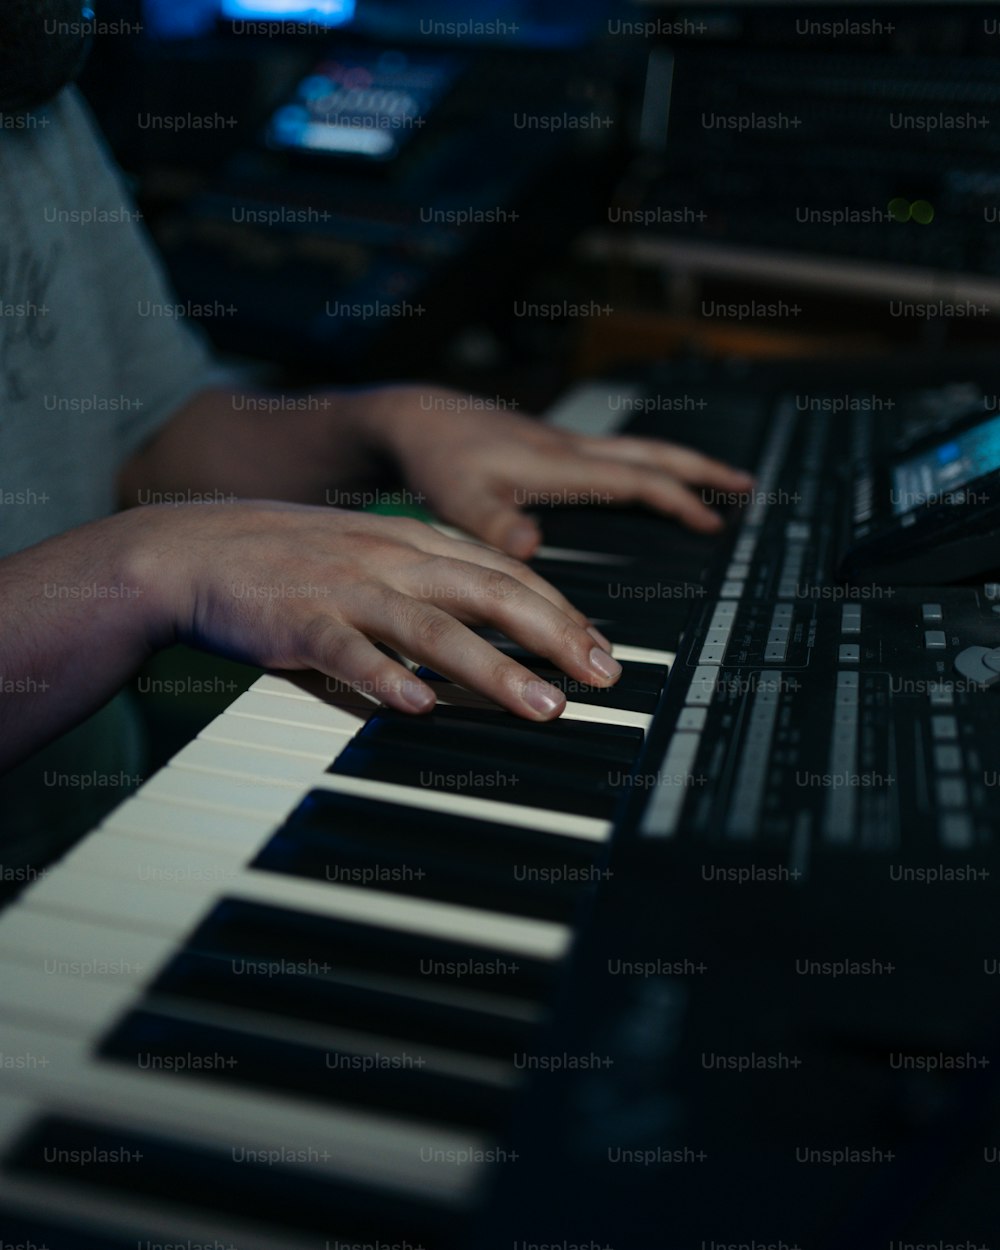 a close up of a person playing a keyboard